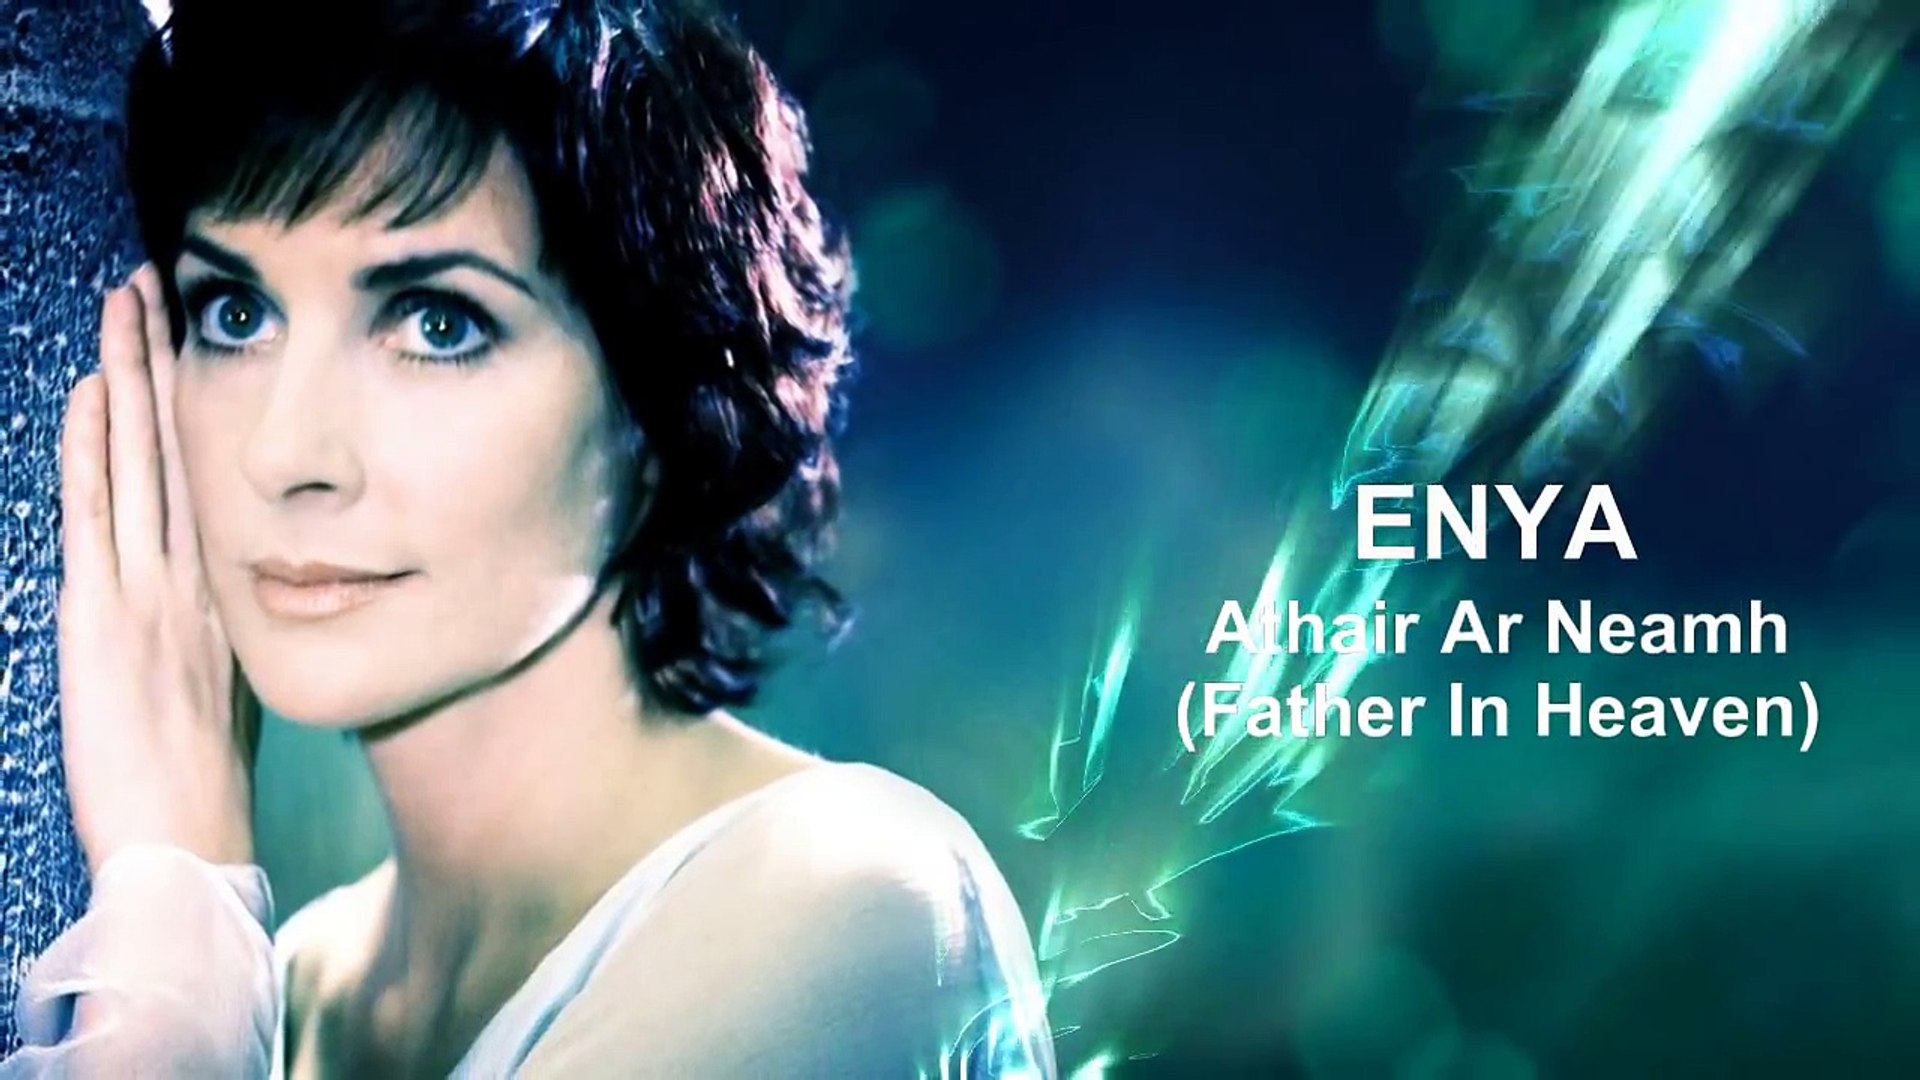 Enya - Athair ar Neamh (Father in Heaven) - video Dailymotion